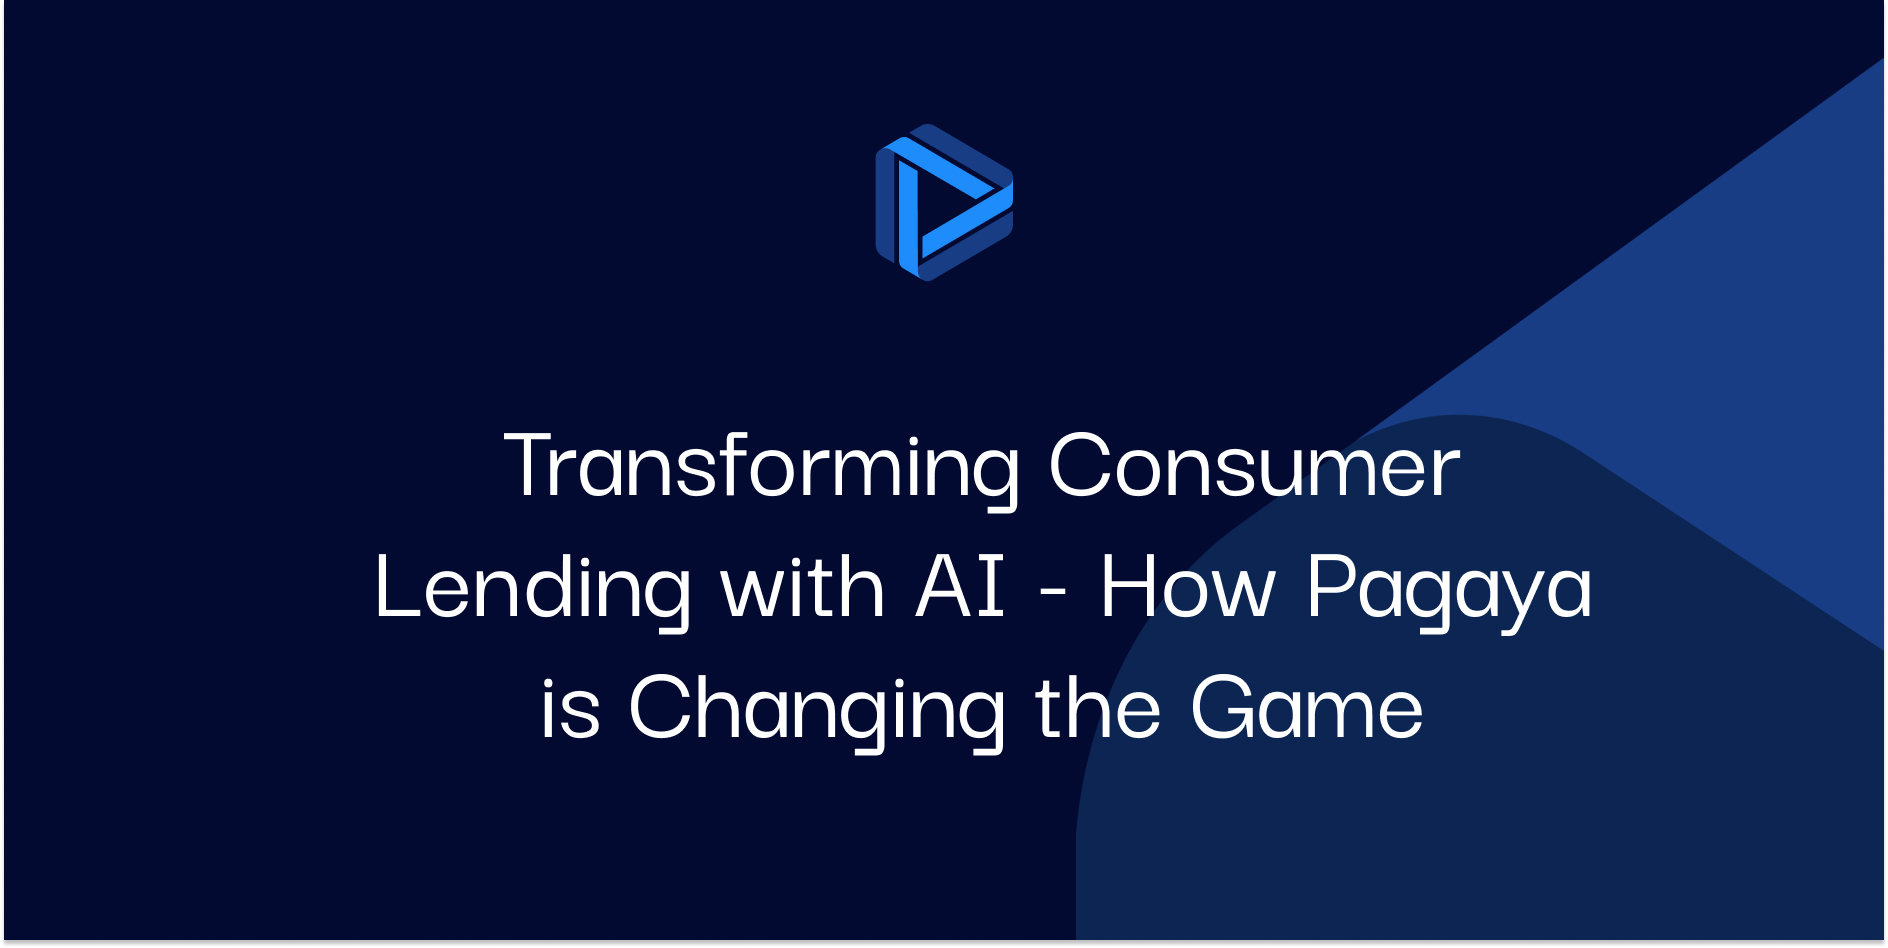 Transforming Consumer Lending with AI - How Pagaya is Changing the Game